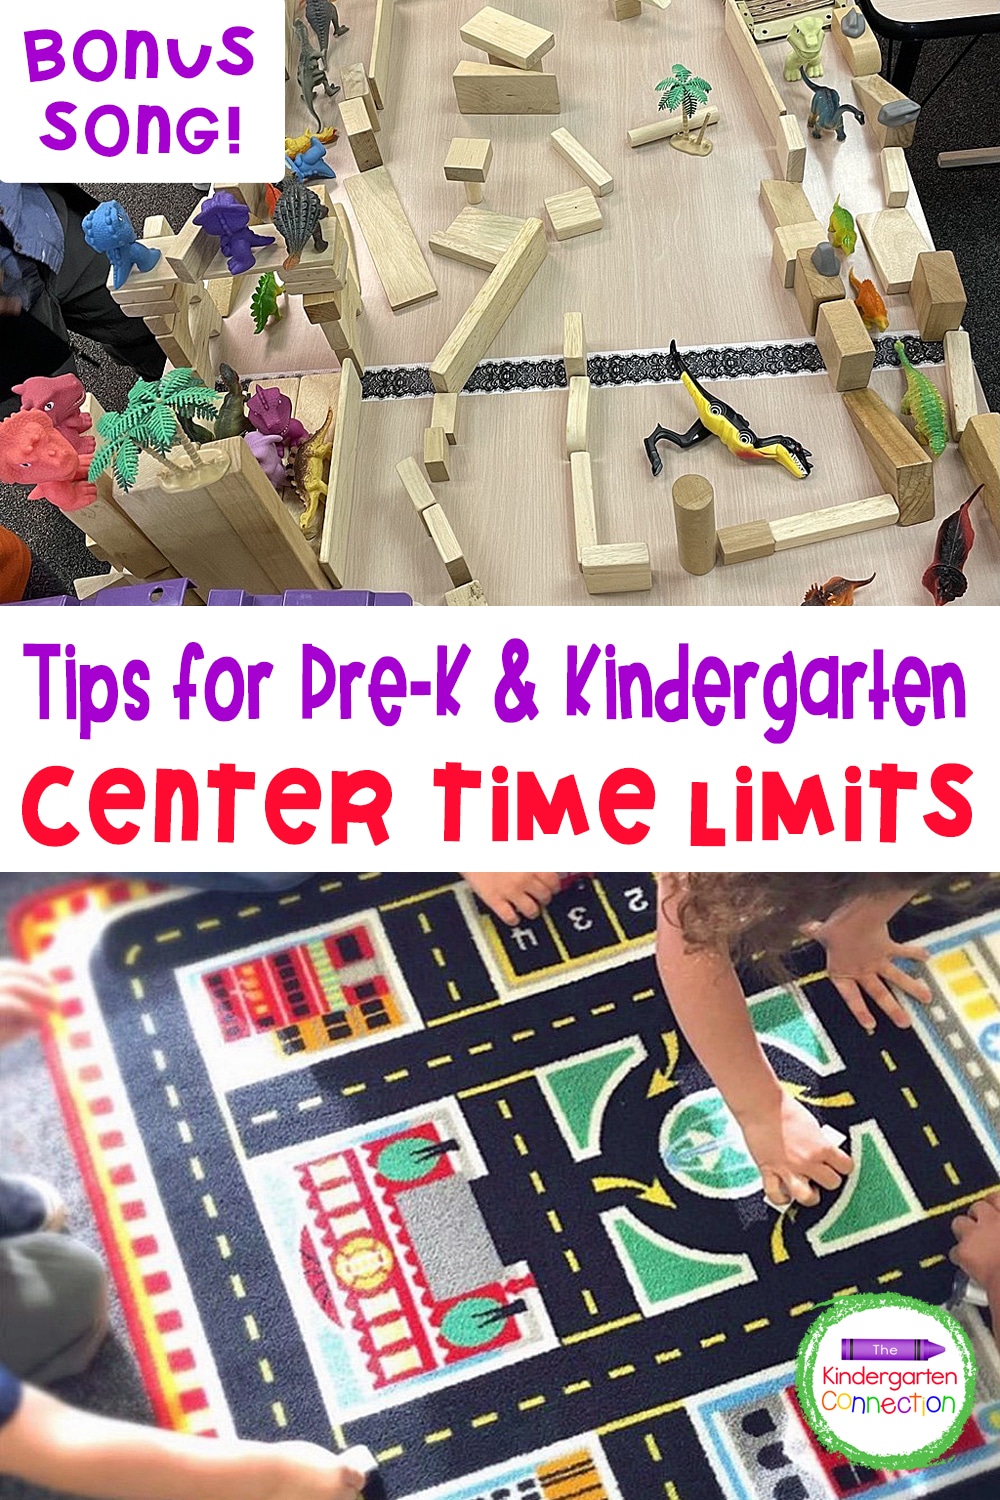 Must-Try Tips for Pre-K and Kindergarten Center Time Limits